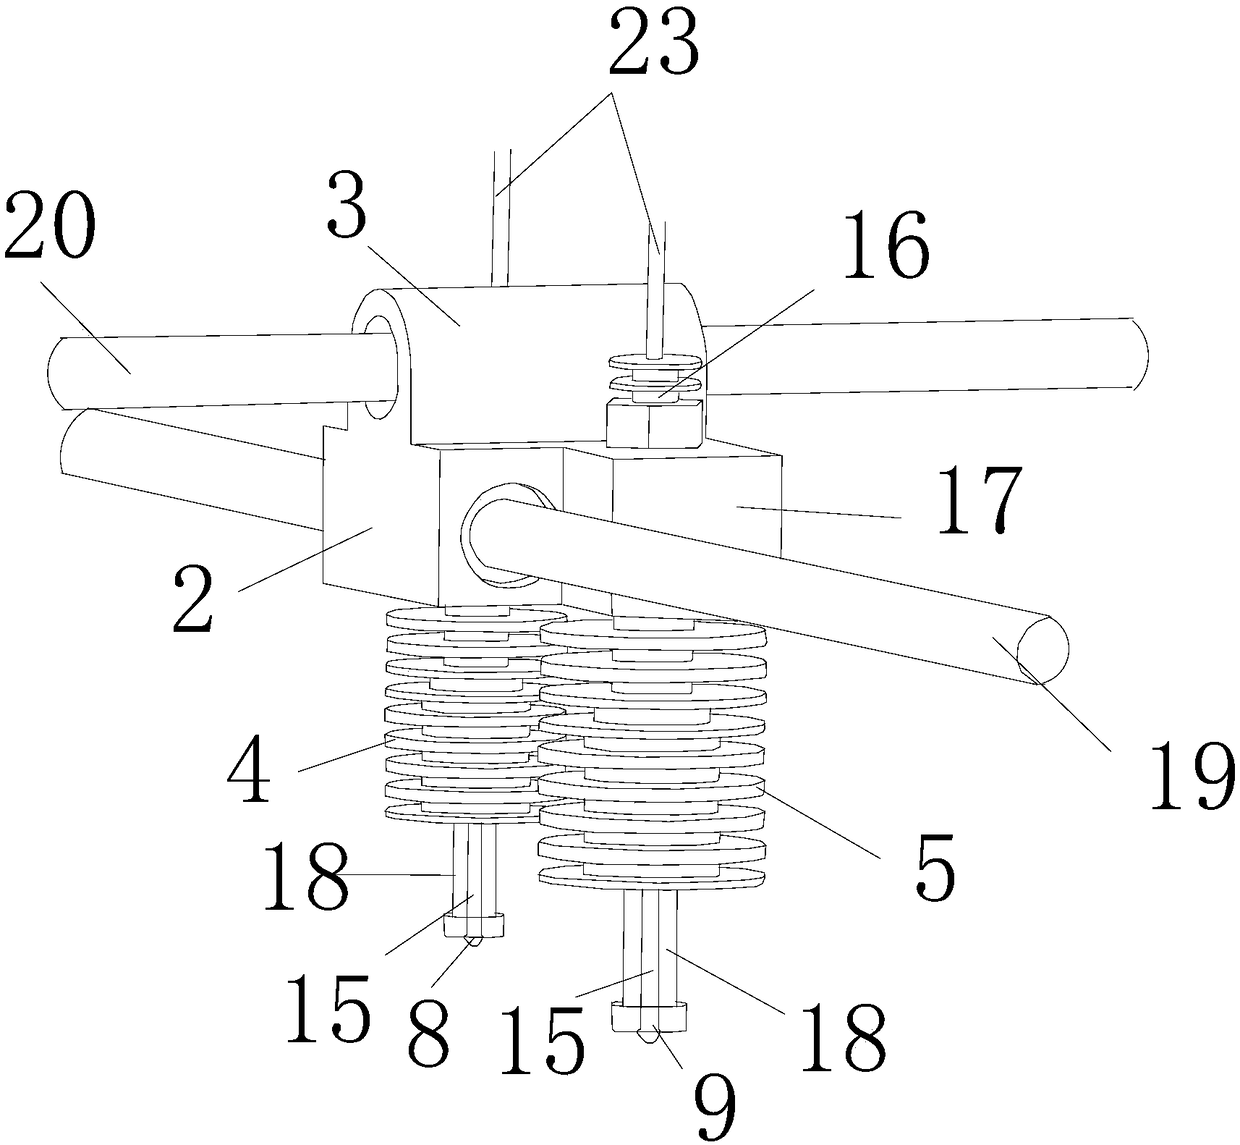 A preparation method and device for a double-nozzle wire-extruding mechanism